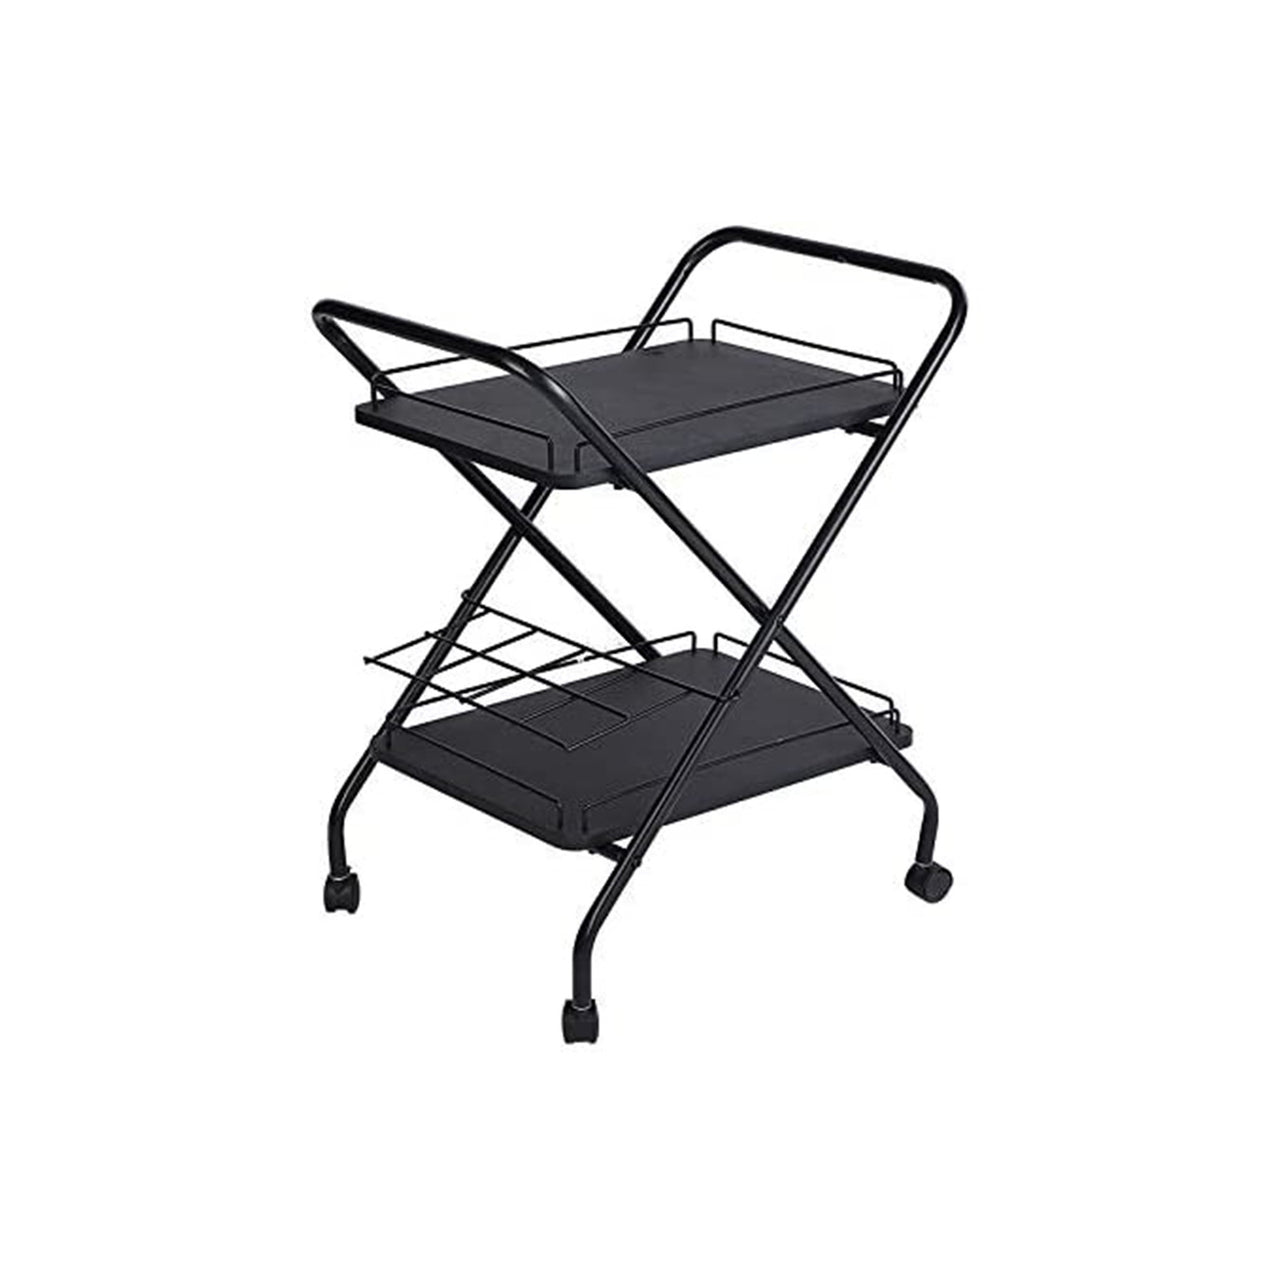 2-Tier Rolling Utility Cart With Wheels, Metal Bar Service Car With Wine Rack, Lockable Wheel Multi-Functional Storage Rack For Bar Office And Kitchen